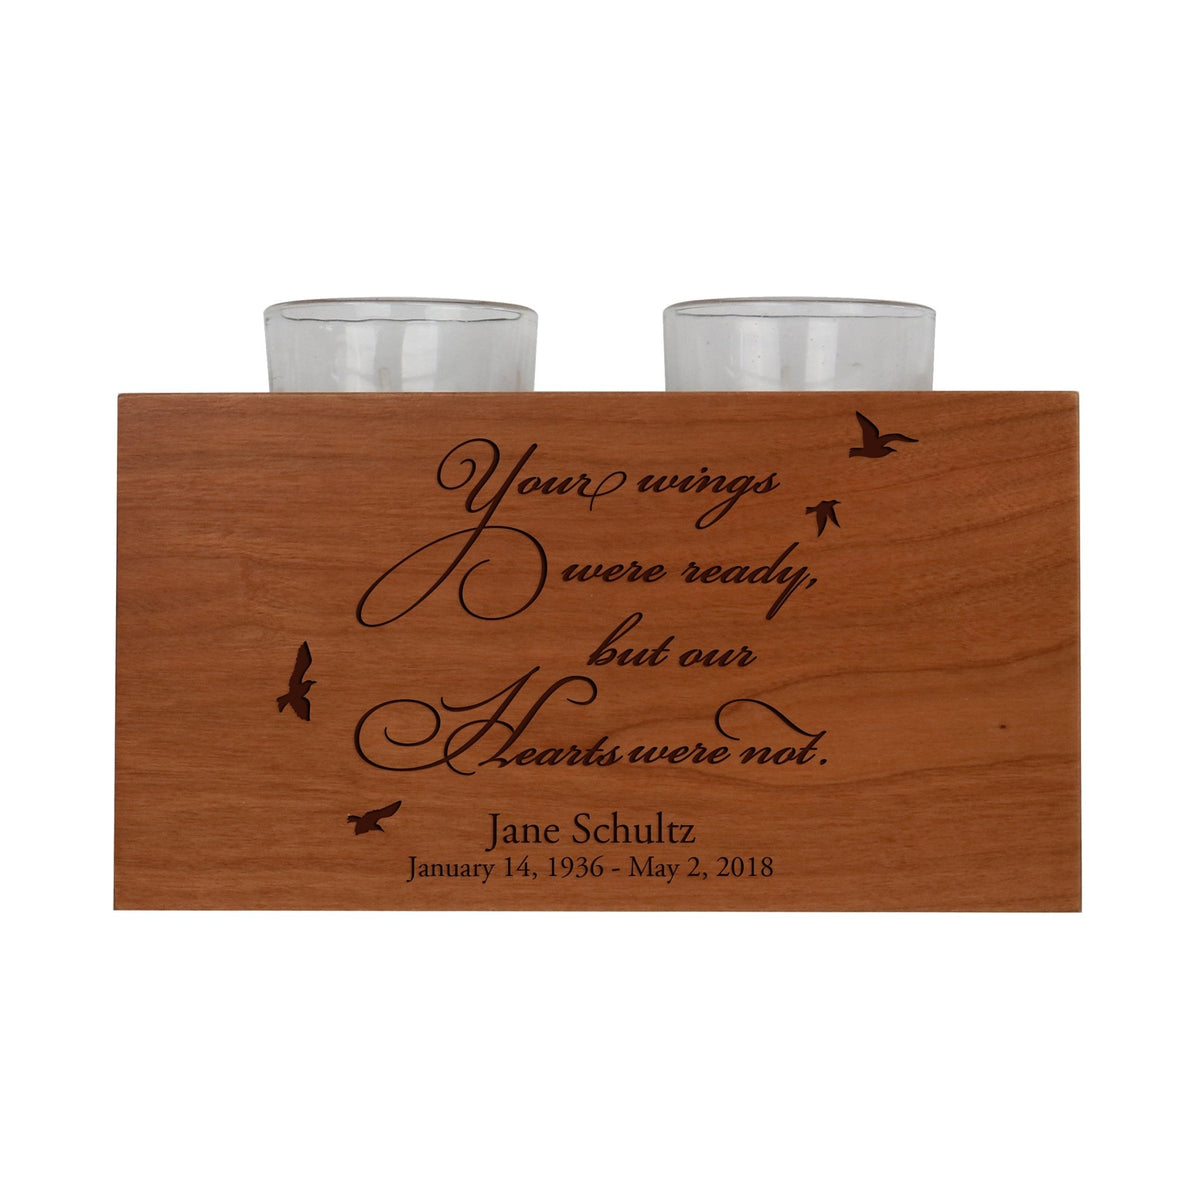 Personalized Engraved Memorial Double Votive Candle Holder - Your Wings Were Ready - LifeSong Milestones